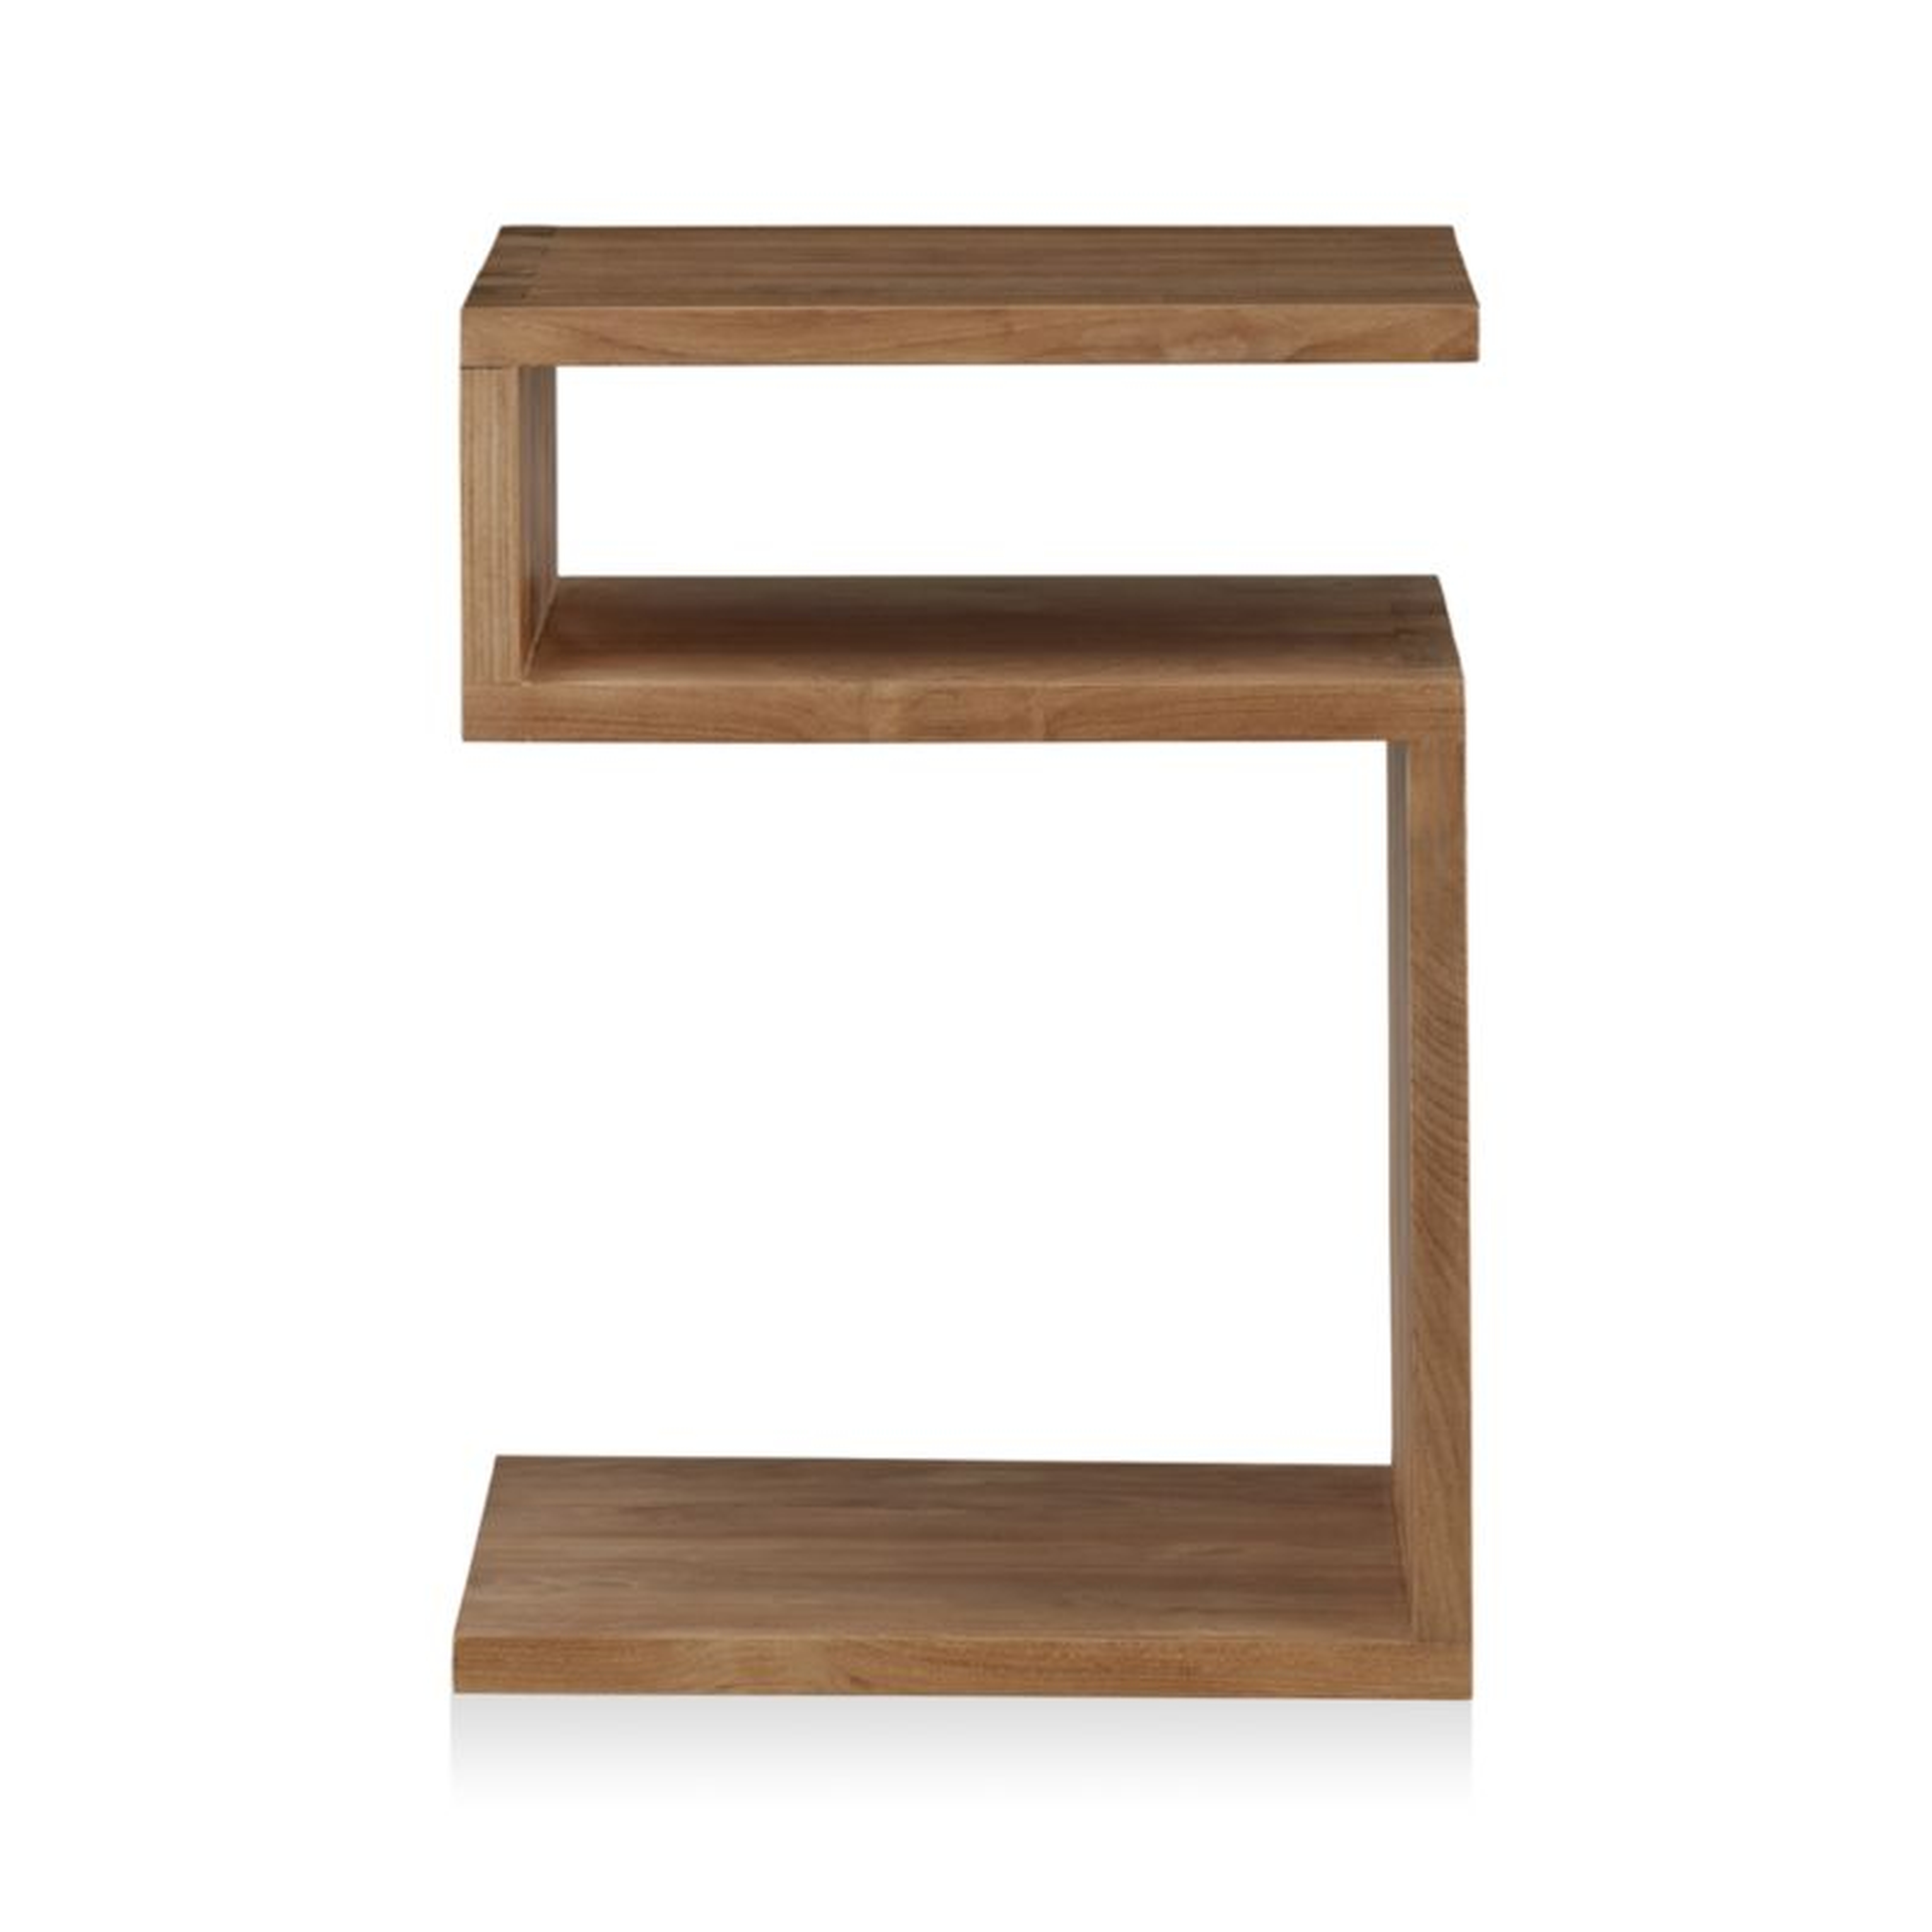 Entu Side Table - Crate and Barrel